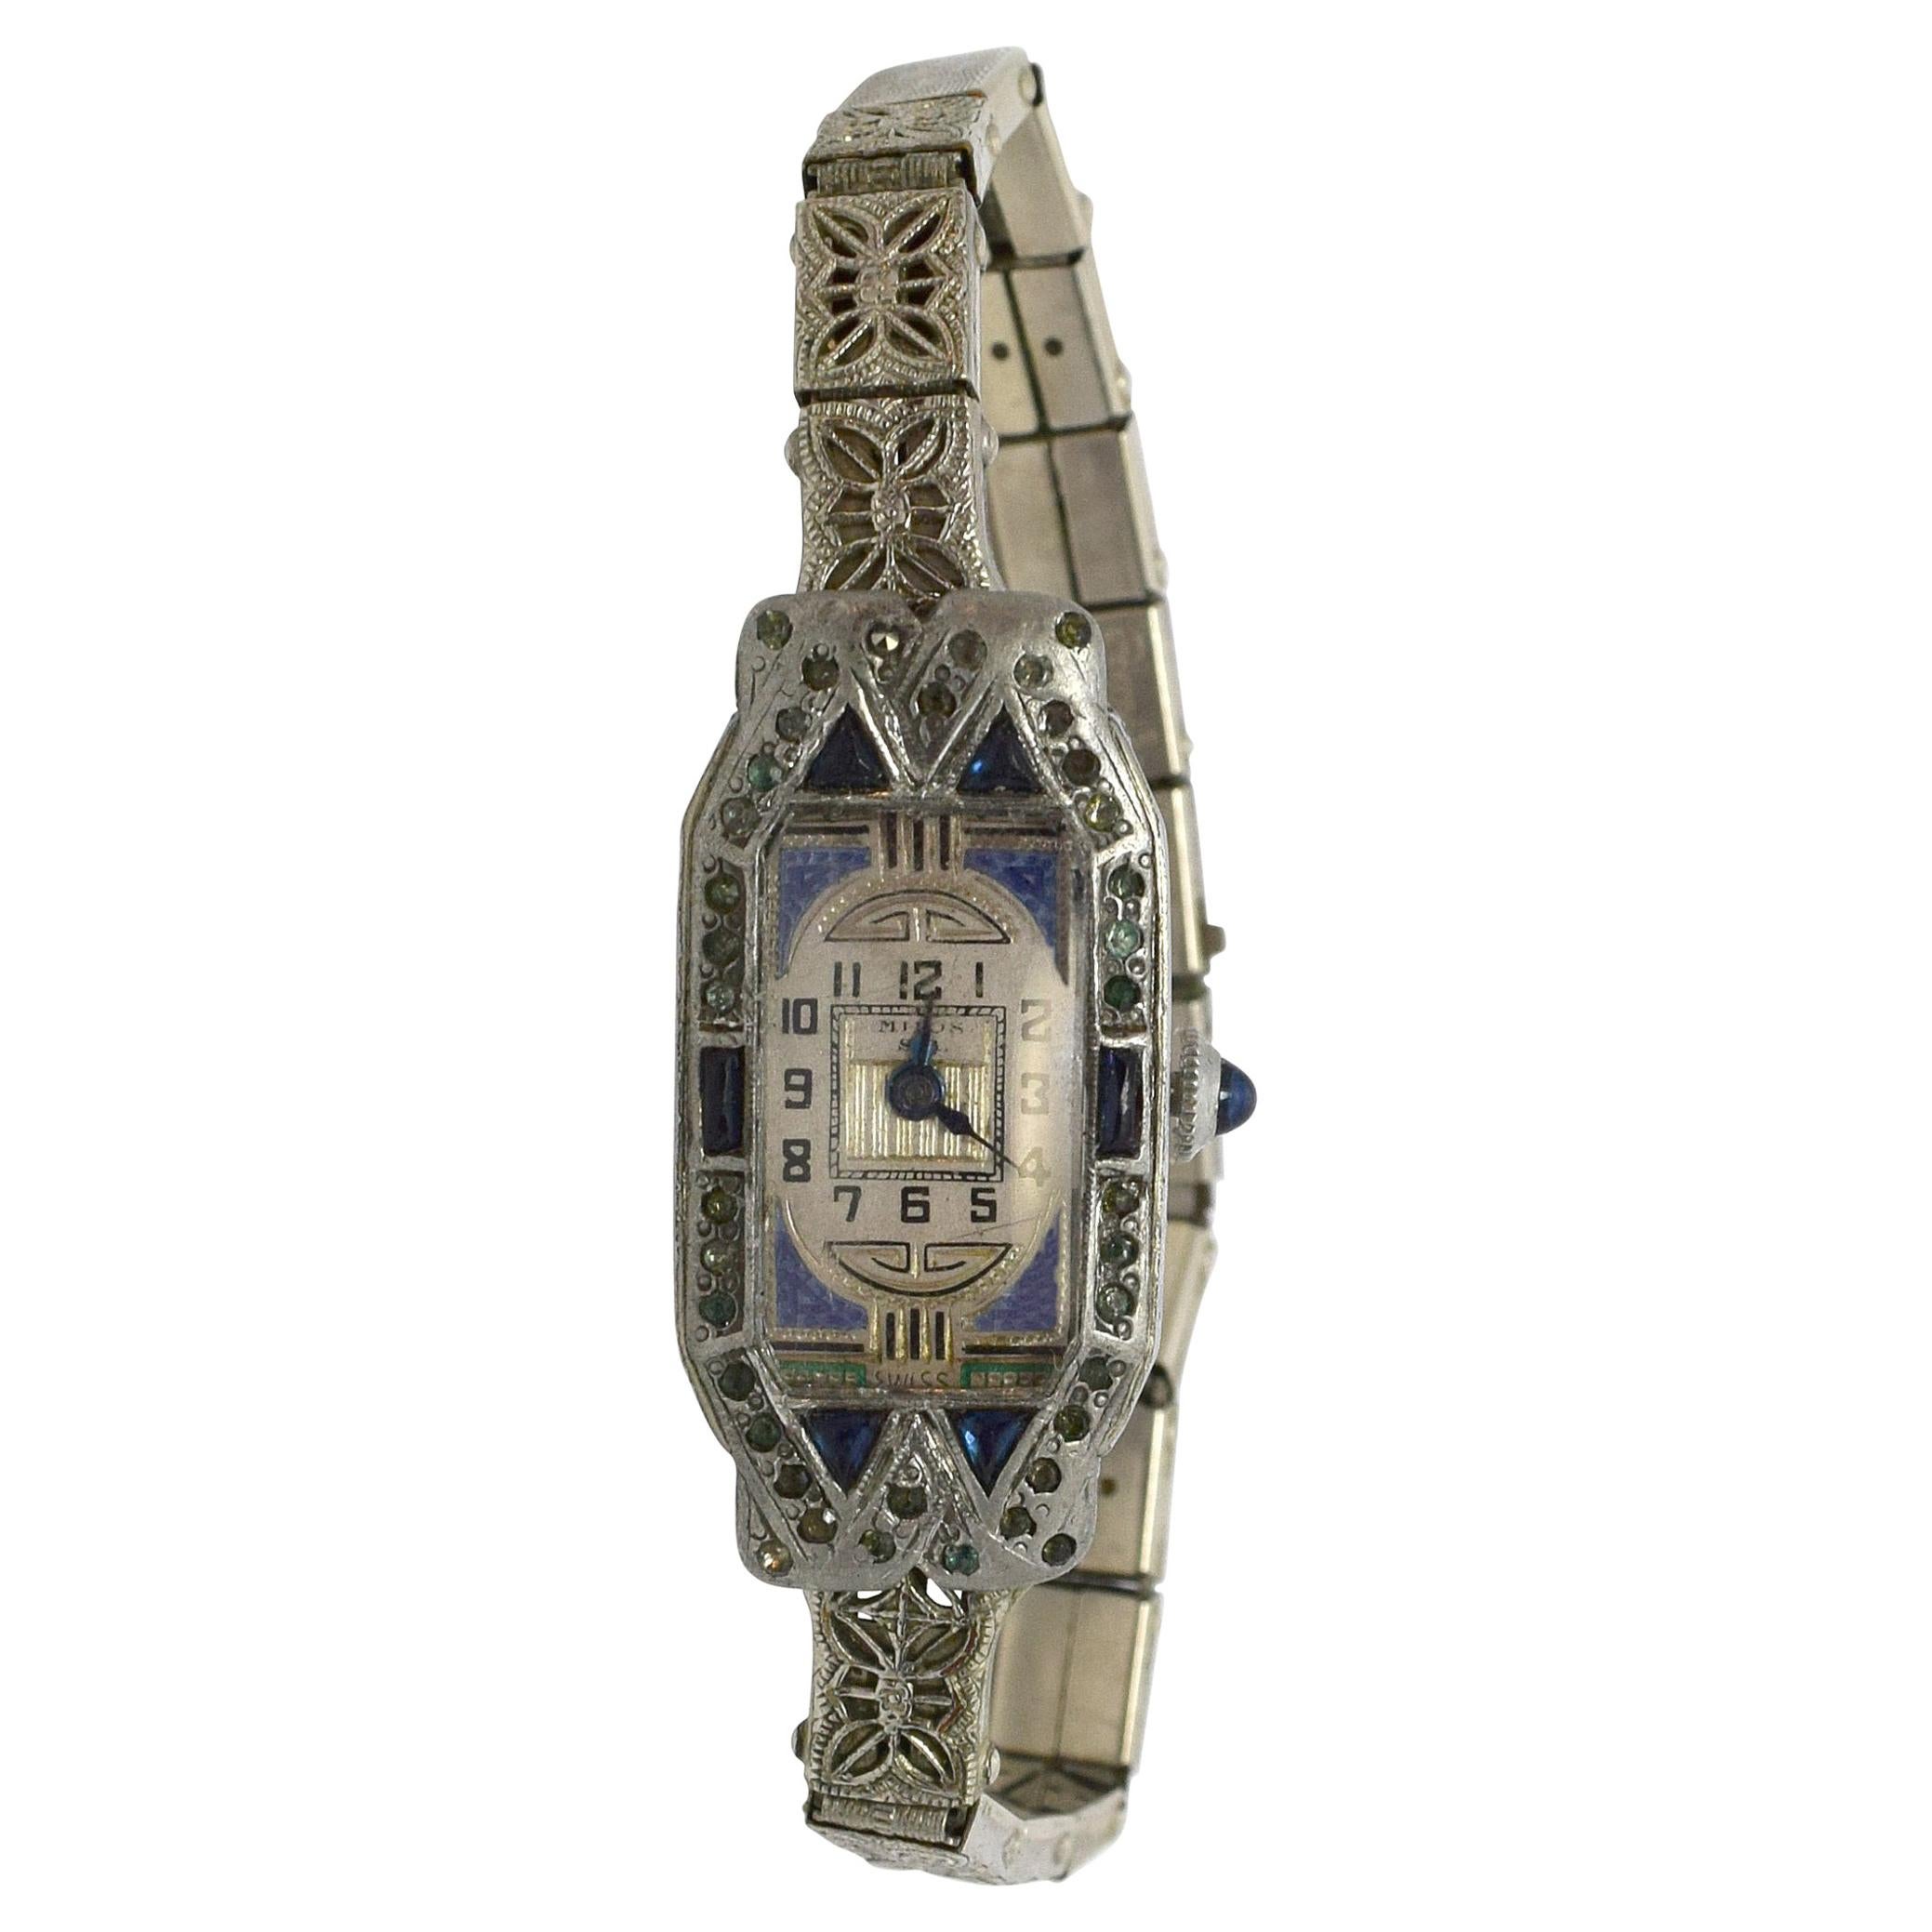 1930s Art Deco Ladies Sapphire Marcasite Enamel Watch with a Filigree Band